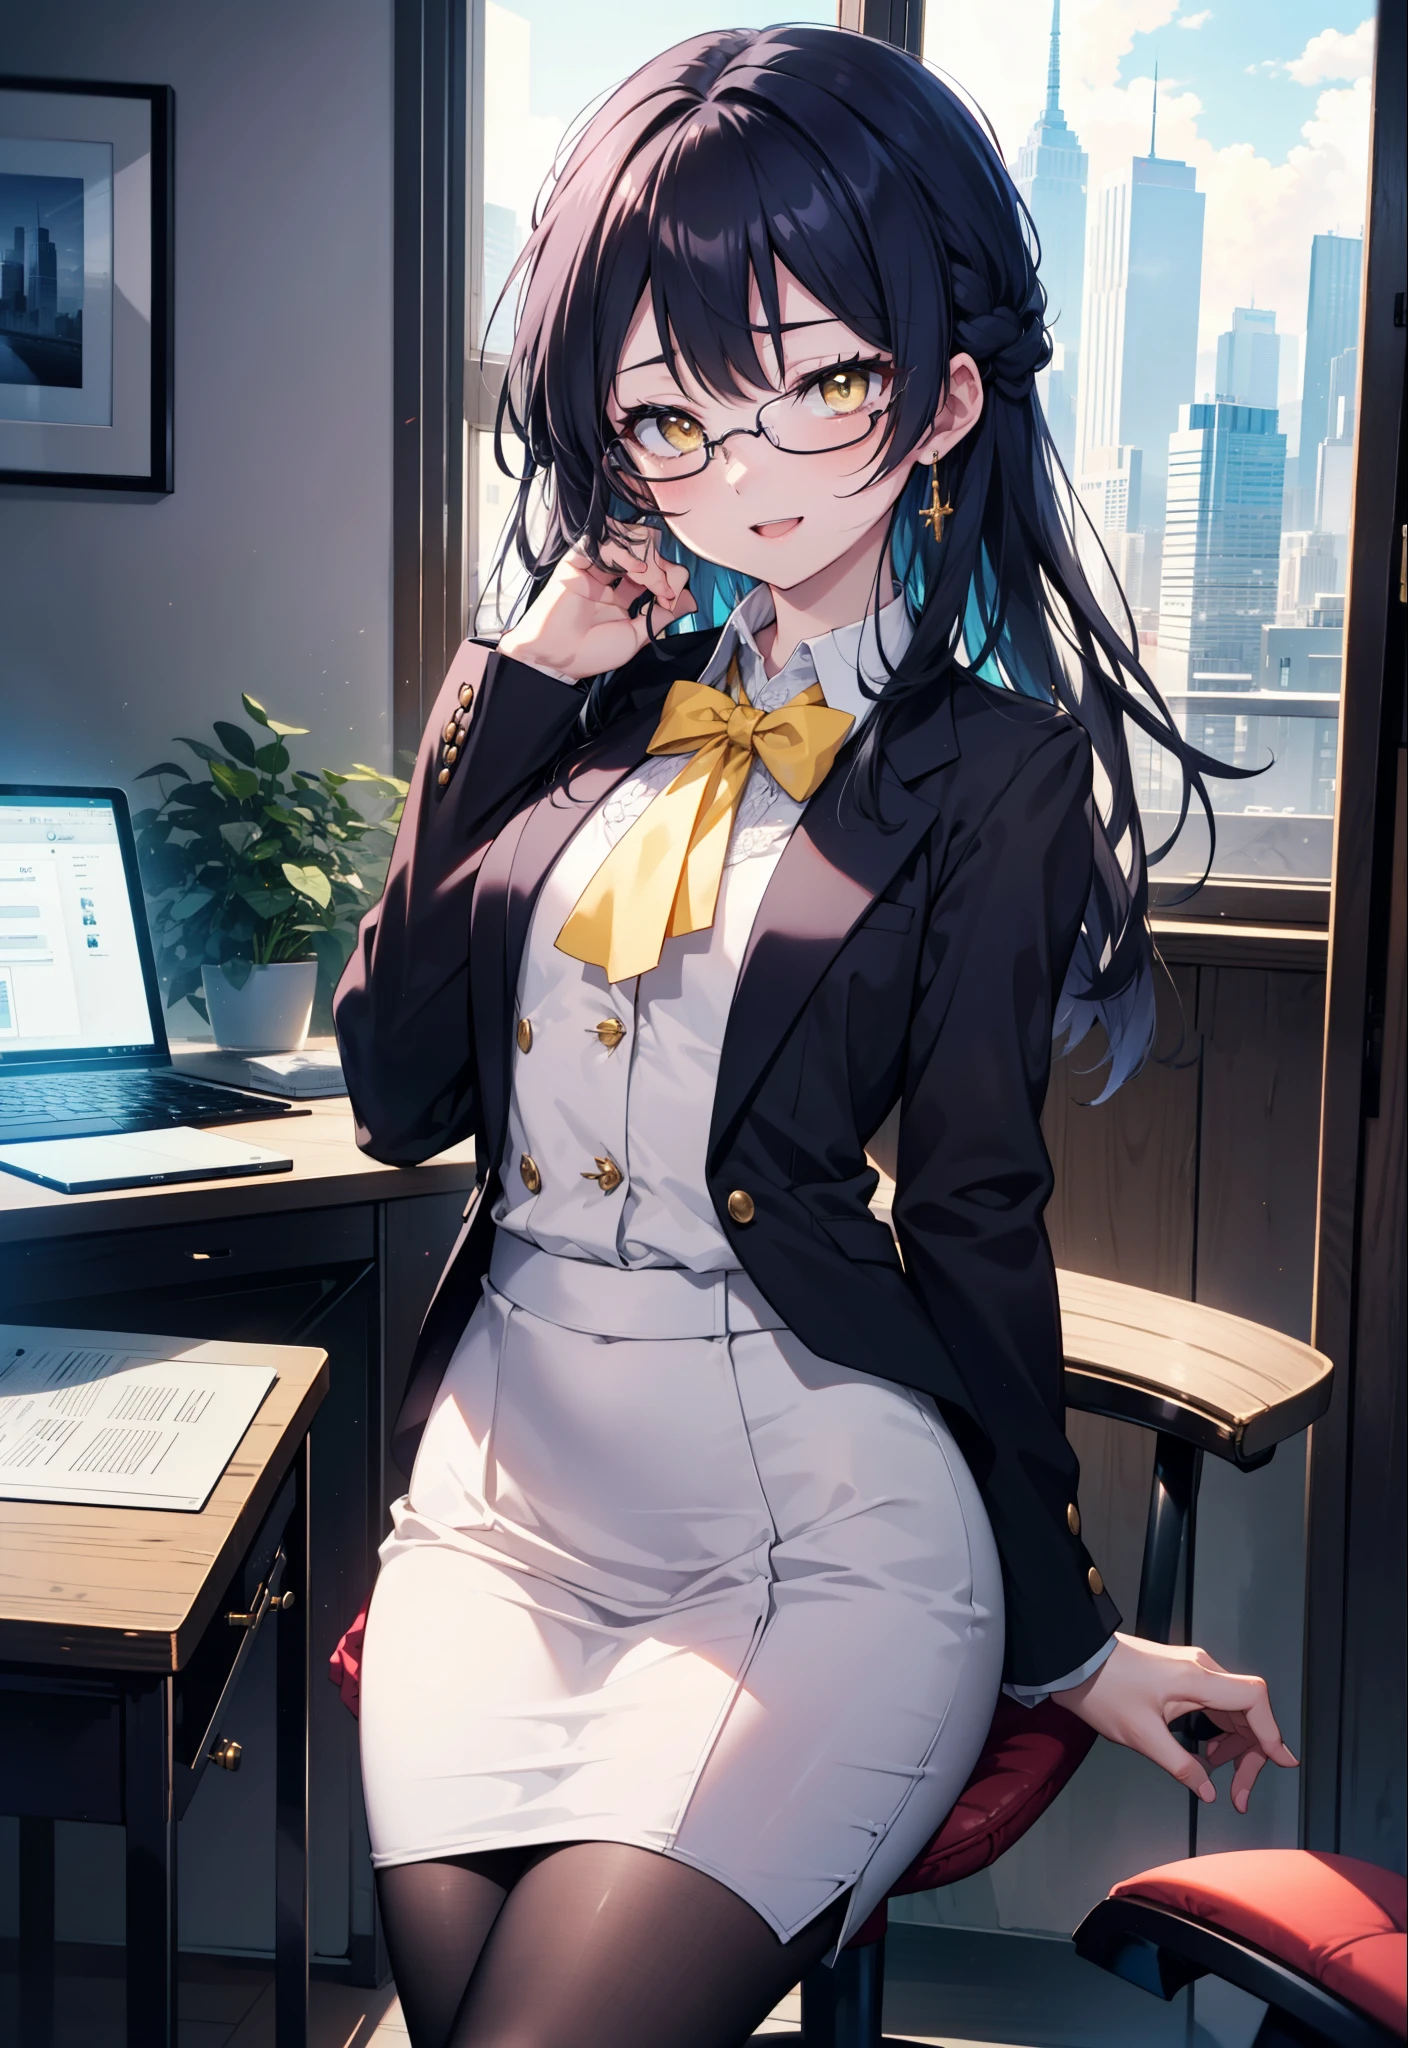 You are very kind, umi sonoda, Long Hair, Blue Hair, (Yellow Eyes:1.5) (Flat Chest:1.2),happy smile, smile, Open your mouth,OL, Akagi glasses, black suit jacket, Collared jacket, White dress shirt, Collared shirt, Neckline, button, Black pencil skirt, Black Pantyhose,Stiletto heels,sitting cross-legged on a chair,interior,There is a computer on the table,touch typing,It&#39;s as if your whole body is in the illustration., break outdoors,city,Area,シティストリート break looking at viewer, (Cowboy Shot:1.5), break (masterpiece:1.2), highest quality, High resolution, unity 8k wallpaper, (shape:0.8), (Beautiful details:1.6), Highly detailed face, Perfect lighting, Highly detailed CG, (Perfect hands, Perfect Anatomy),